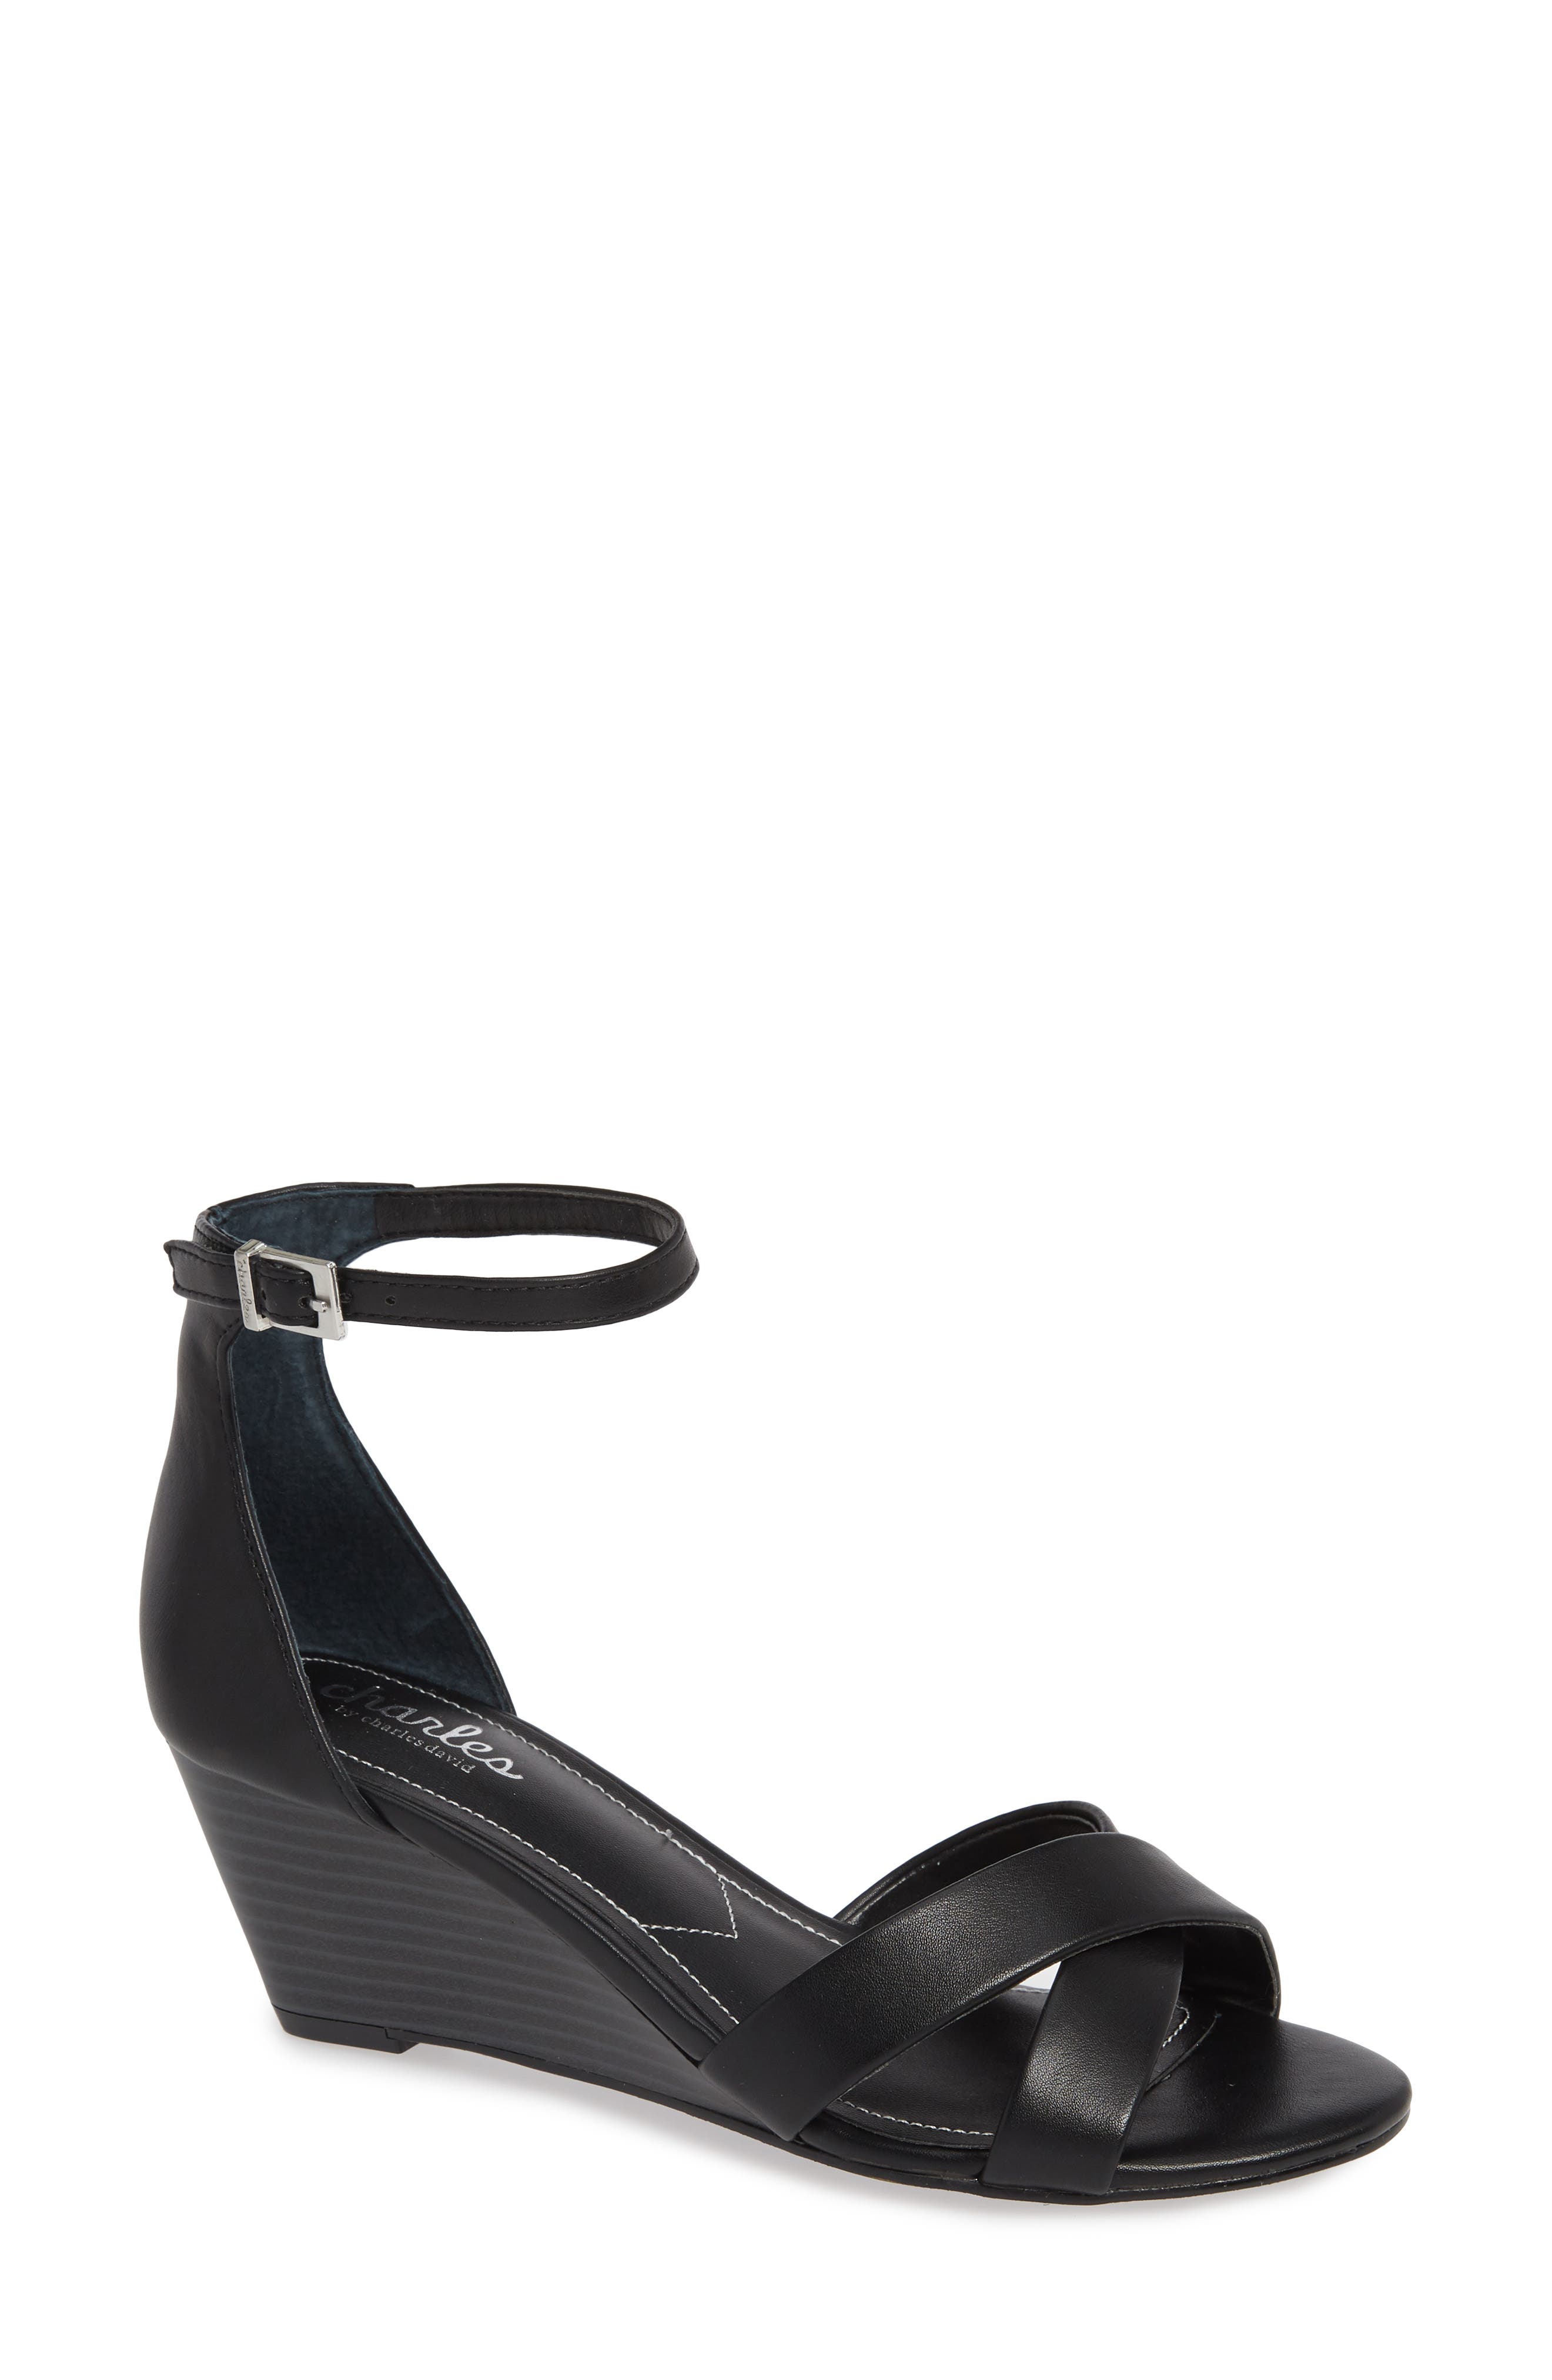 charles by charles david ankle strap flat sandals